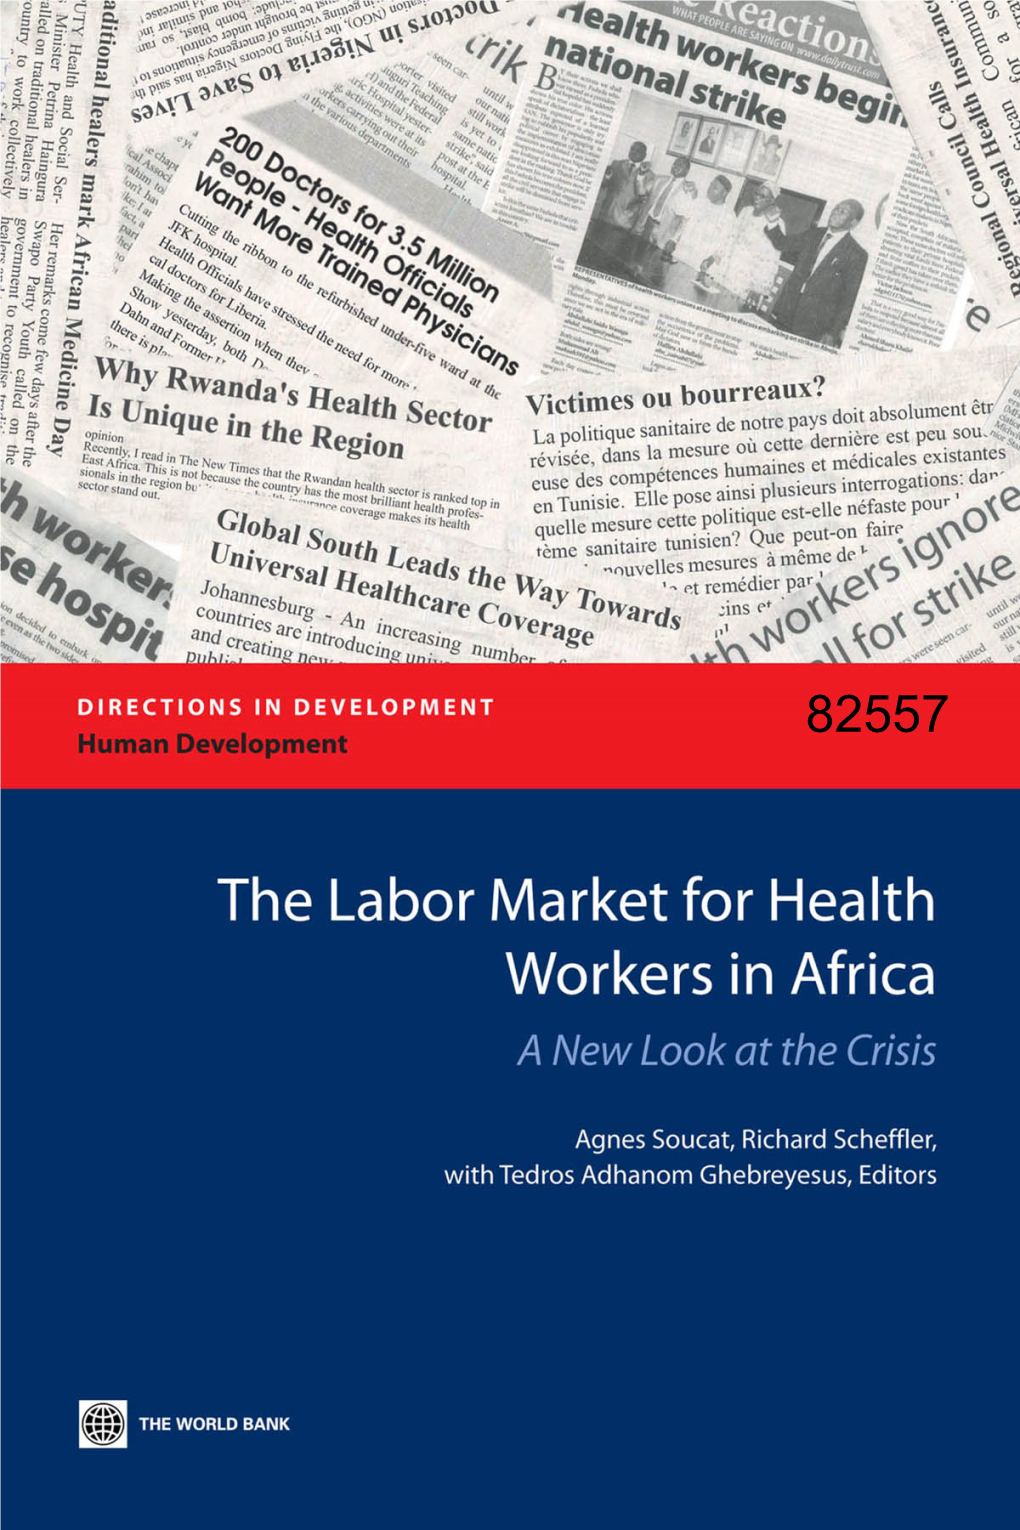 The Labor Market for Health Workers in Africa